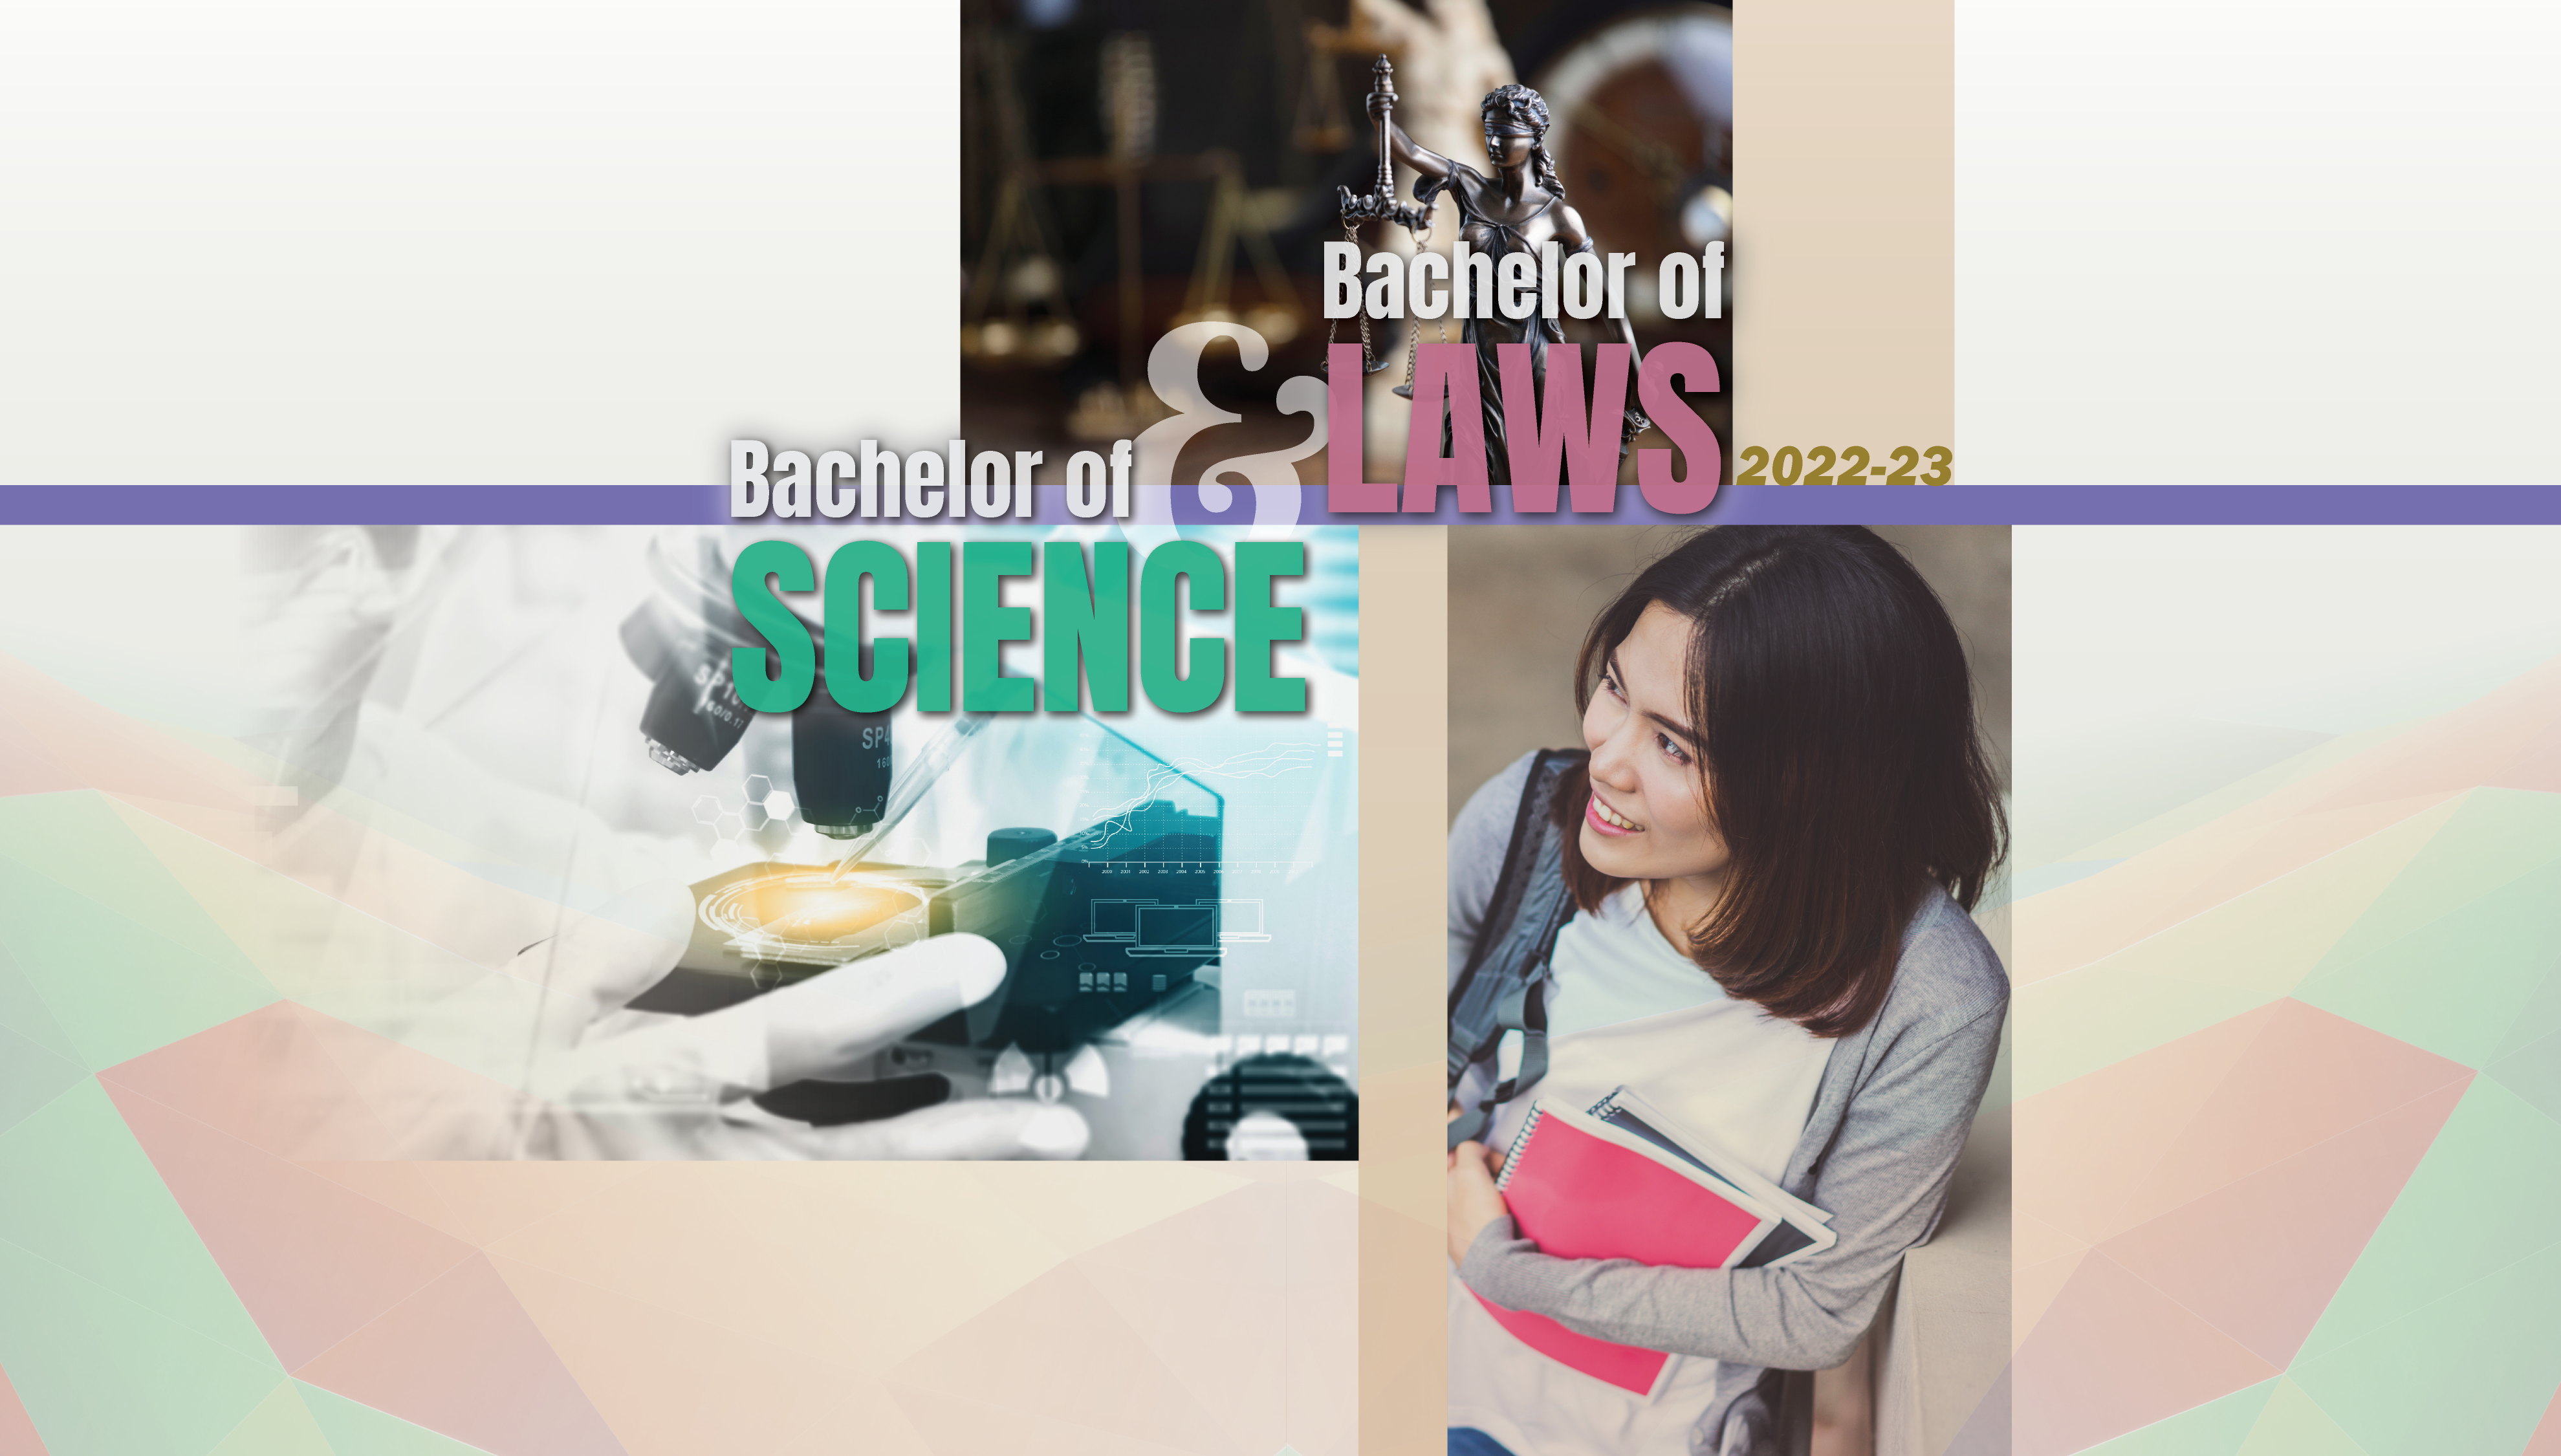 New 5-year double degree programme: 6858 Bachelor of Science & Bachelor of Law 2022-23